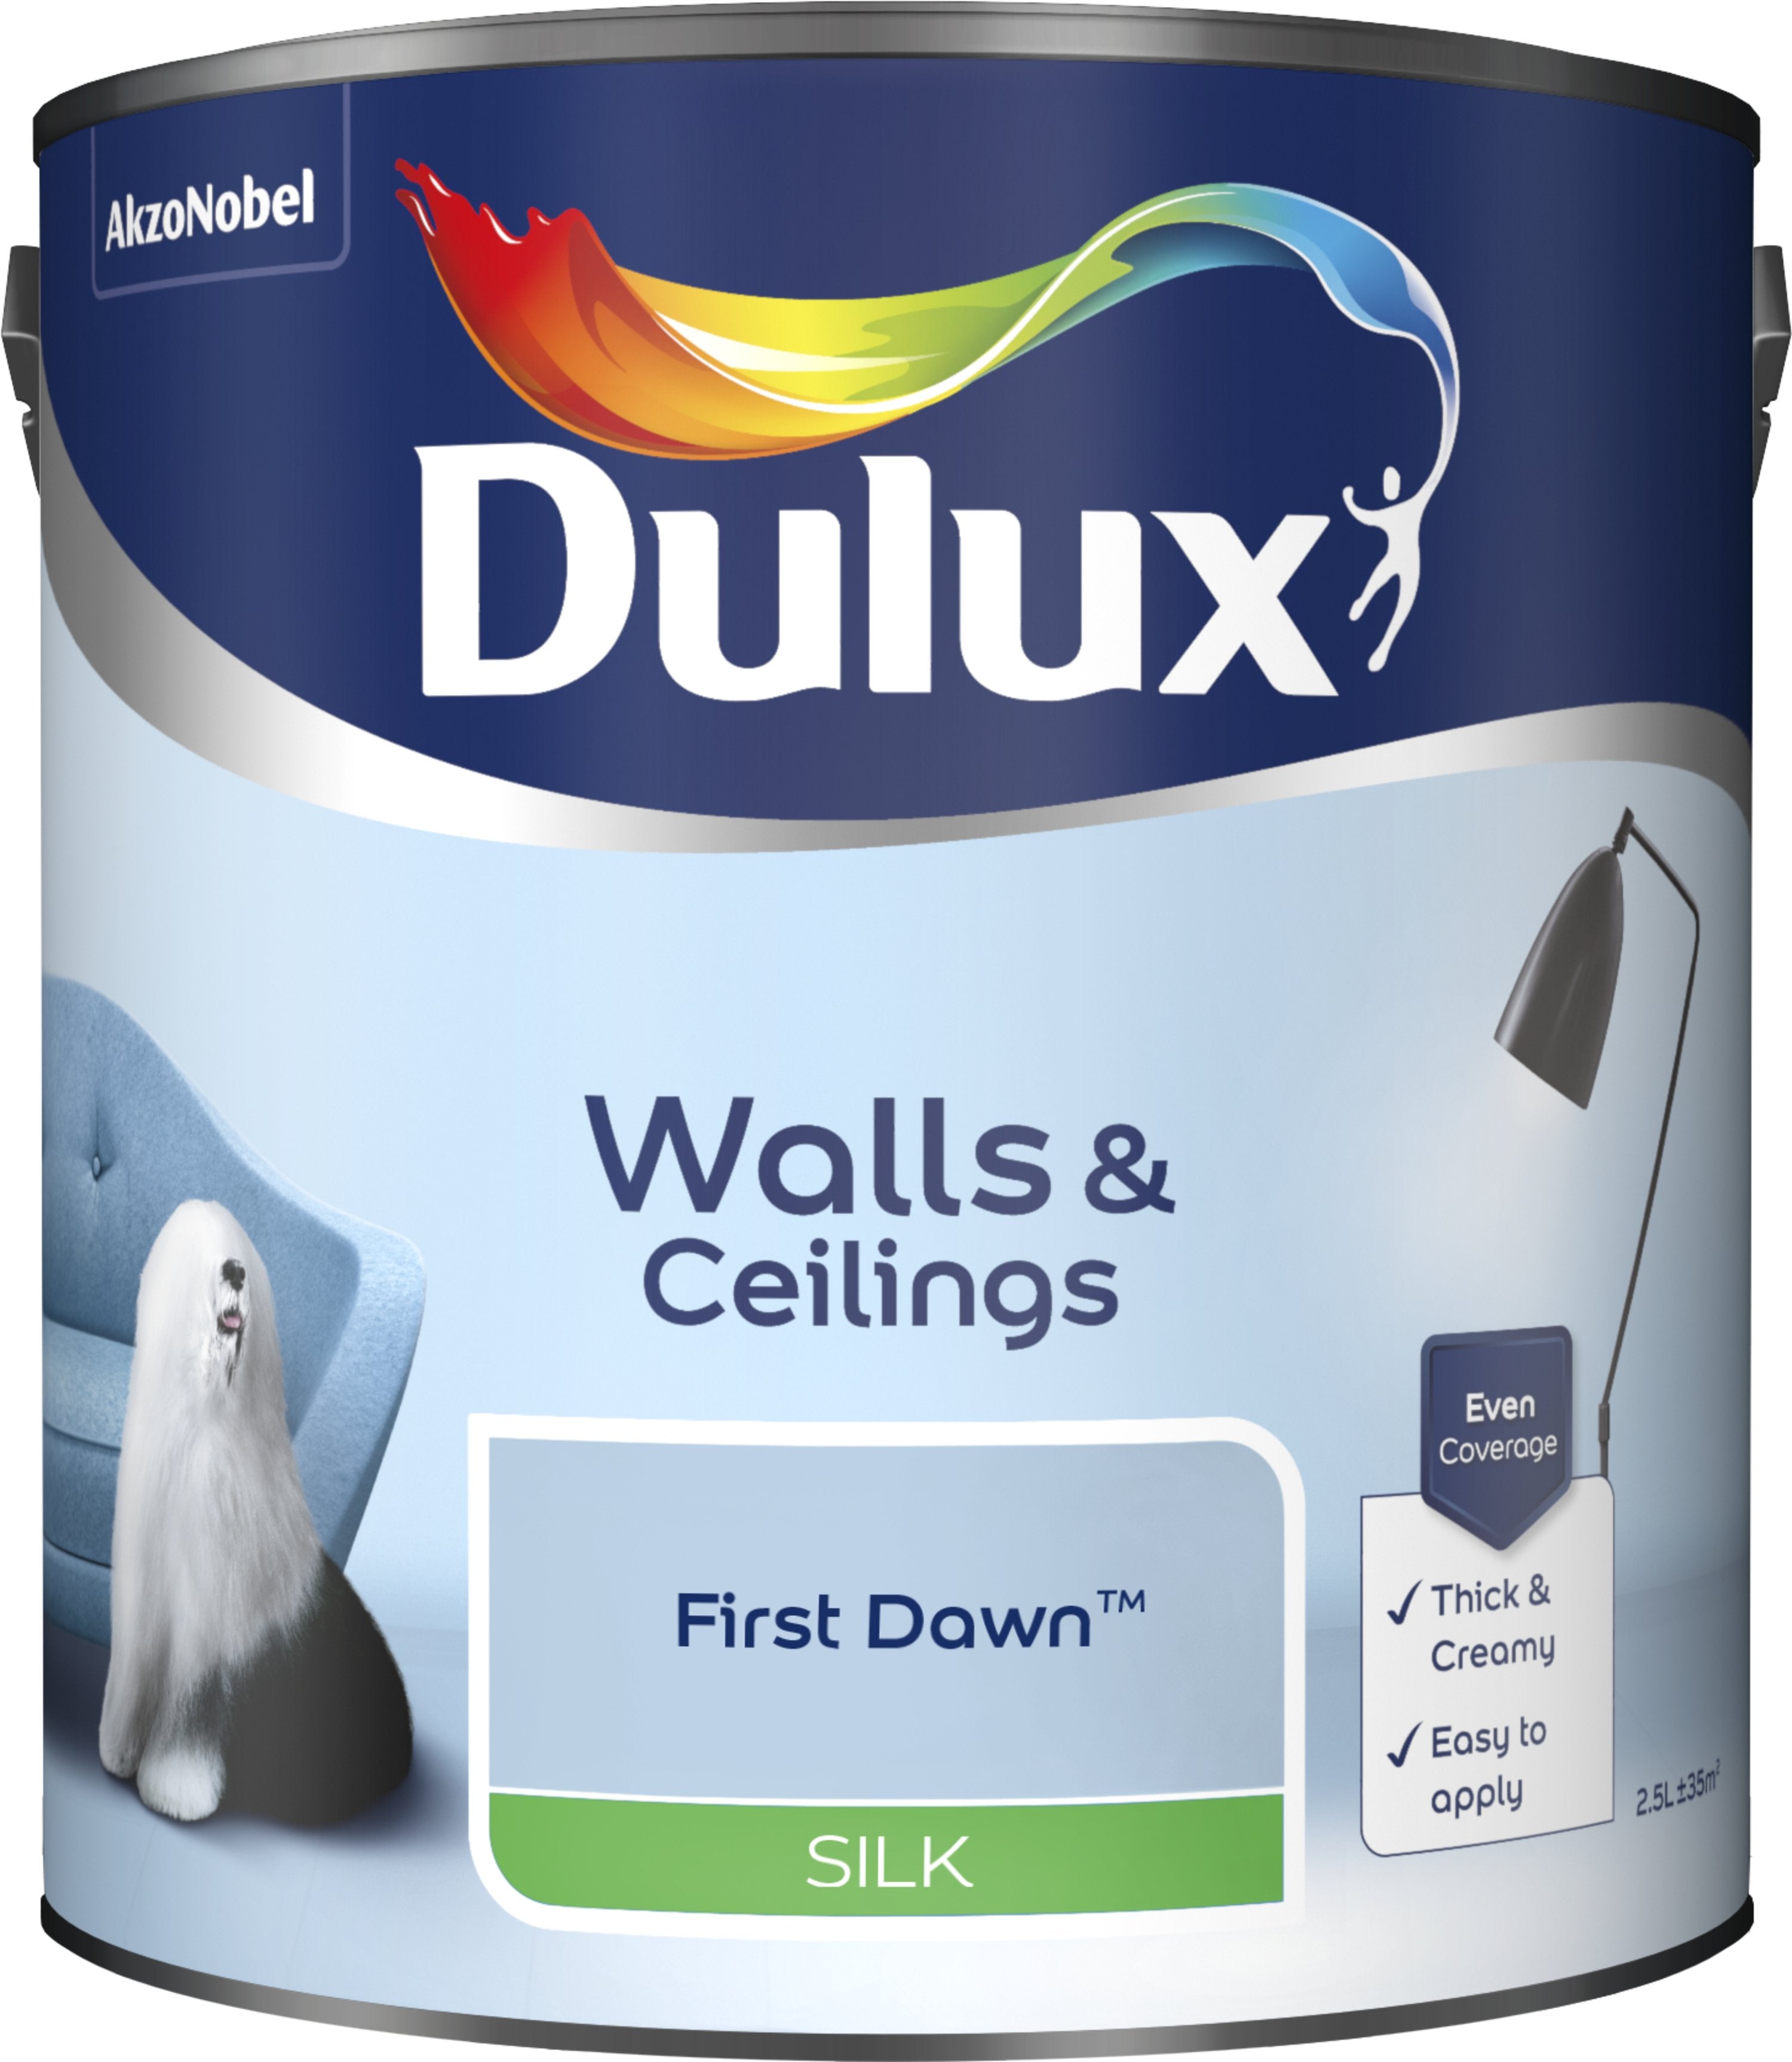 Dulux Silk Emulsion Paint For Walls And Ceilings - First Dawn 2.5L Garden & Diy  Home Improvements  